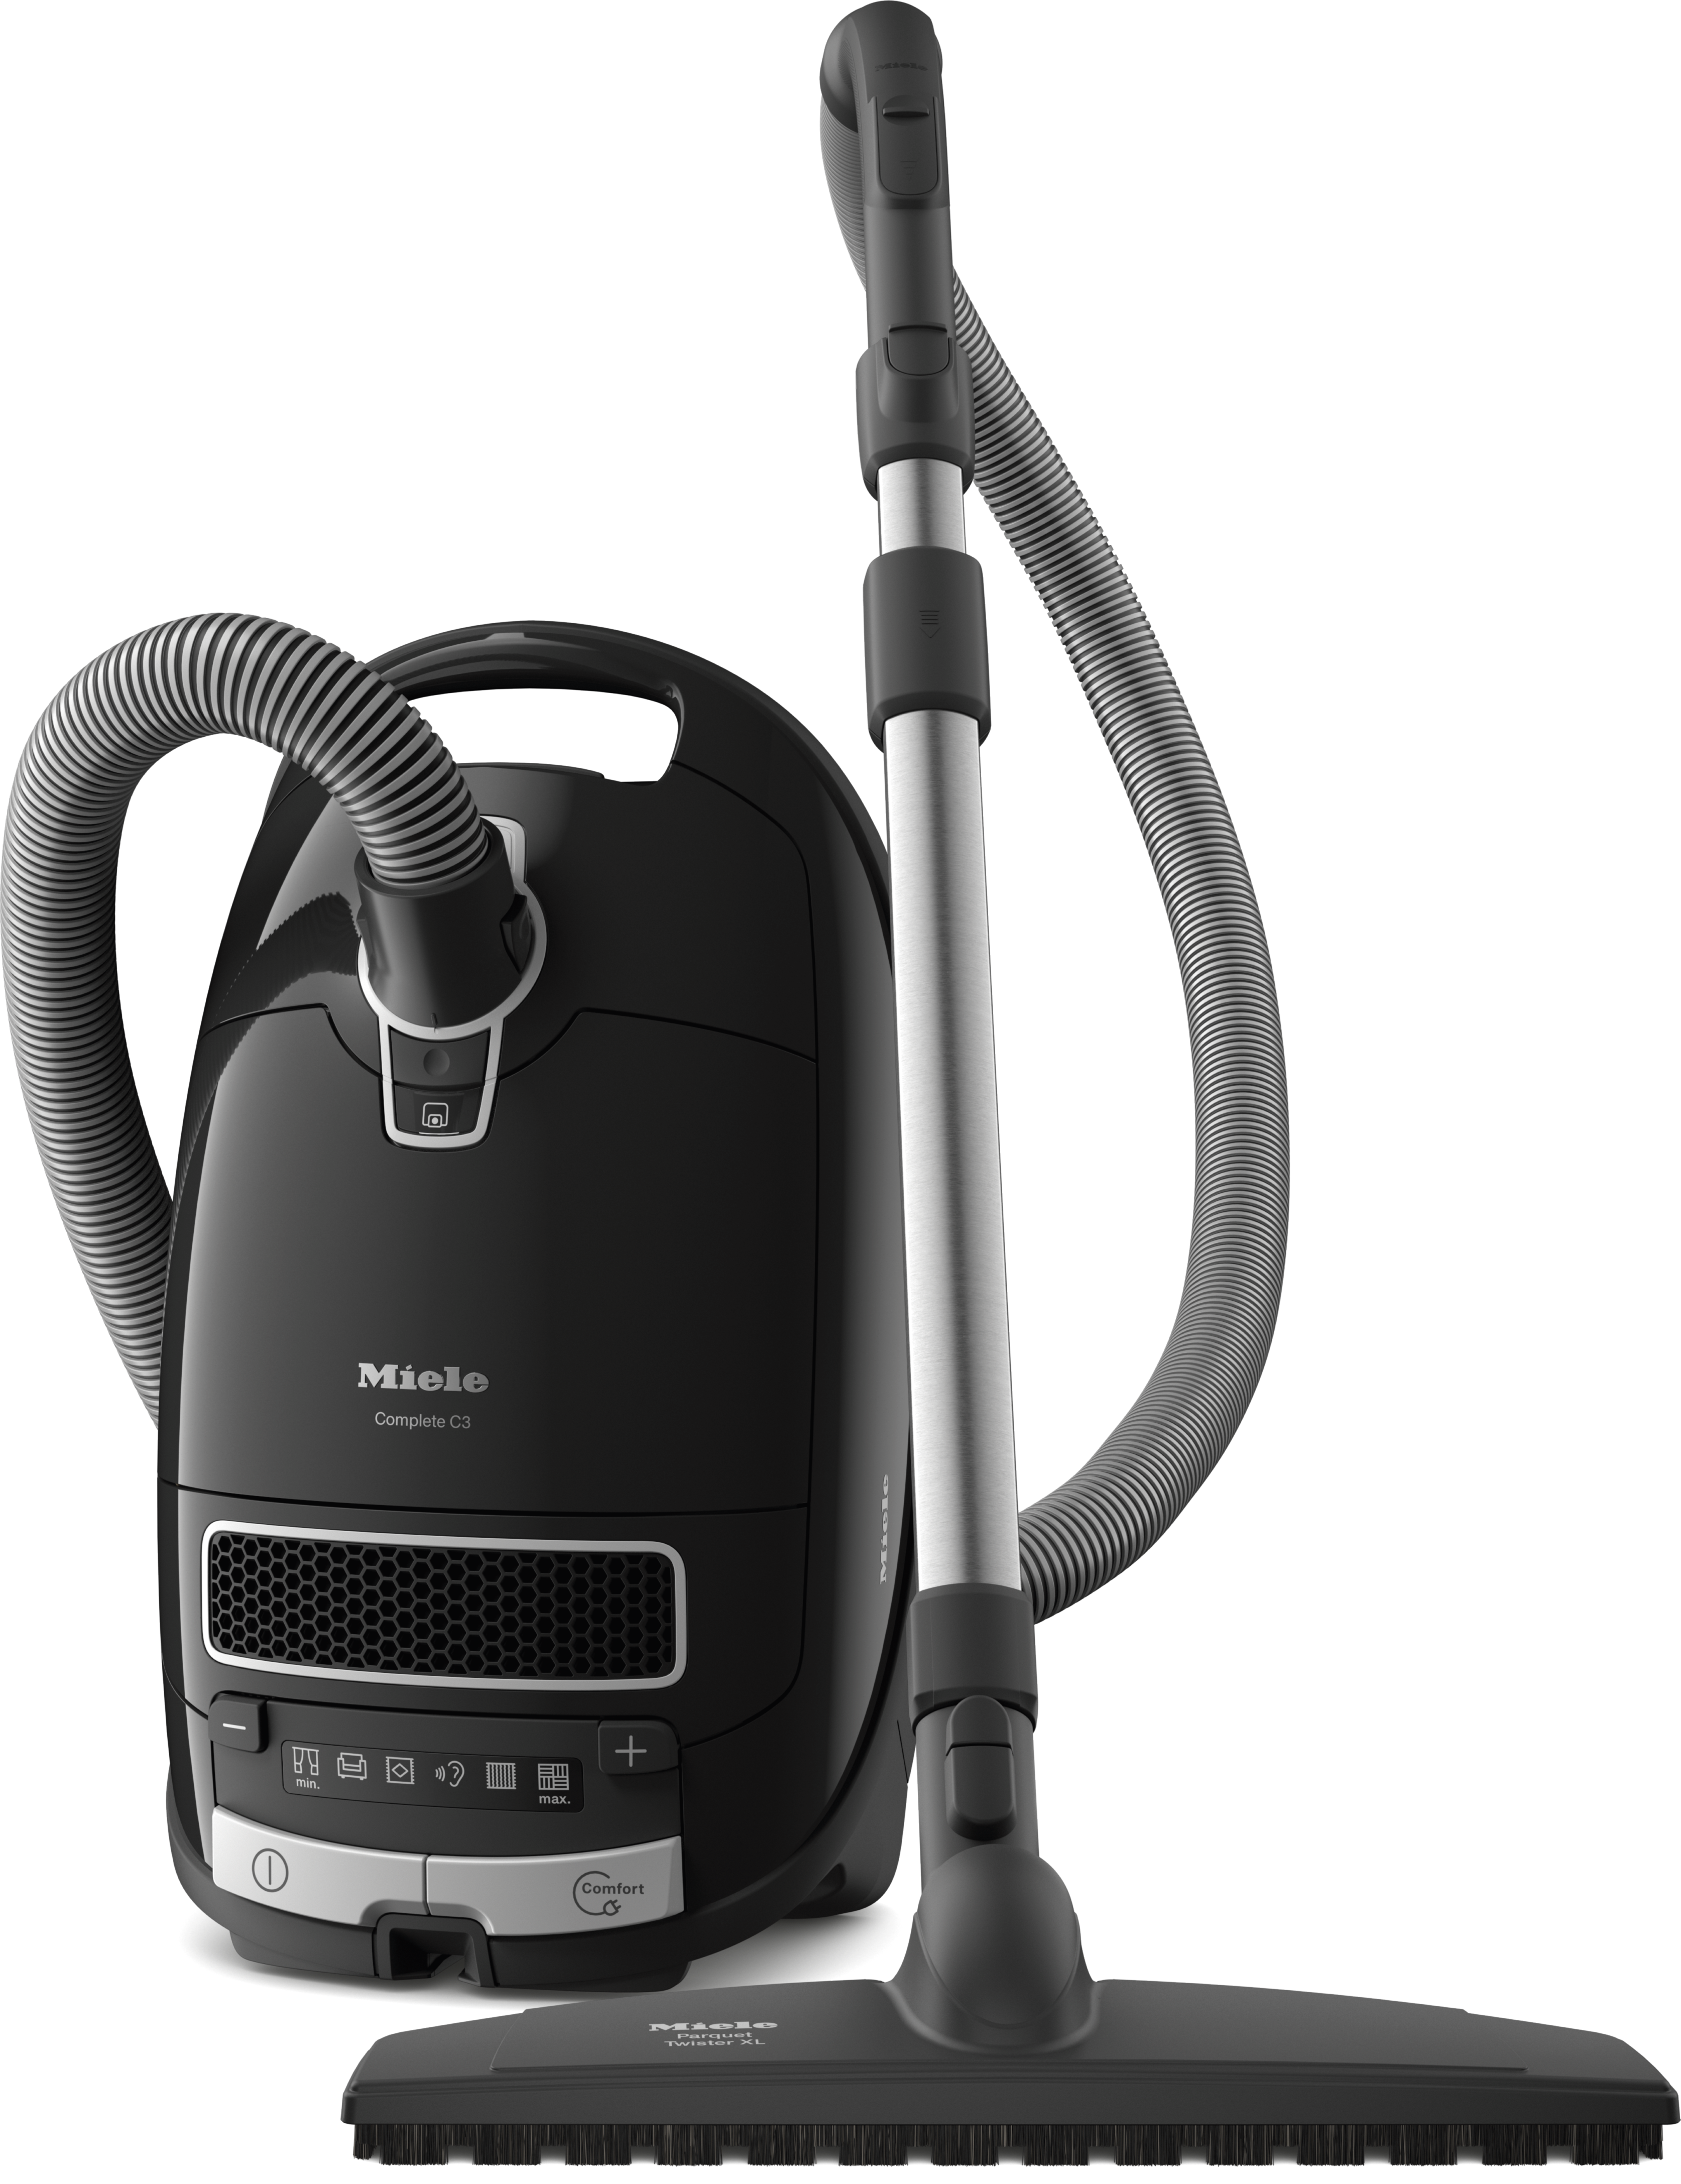 Complete C3 Parquet XLCylinder vacuum cleaner with comprehensive accessories for nearly every cleaning challenge.